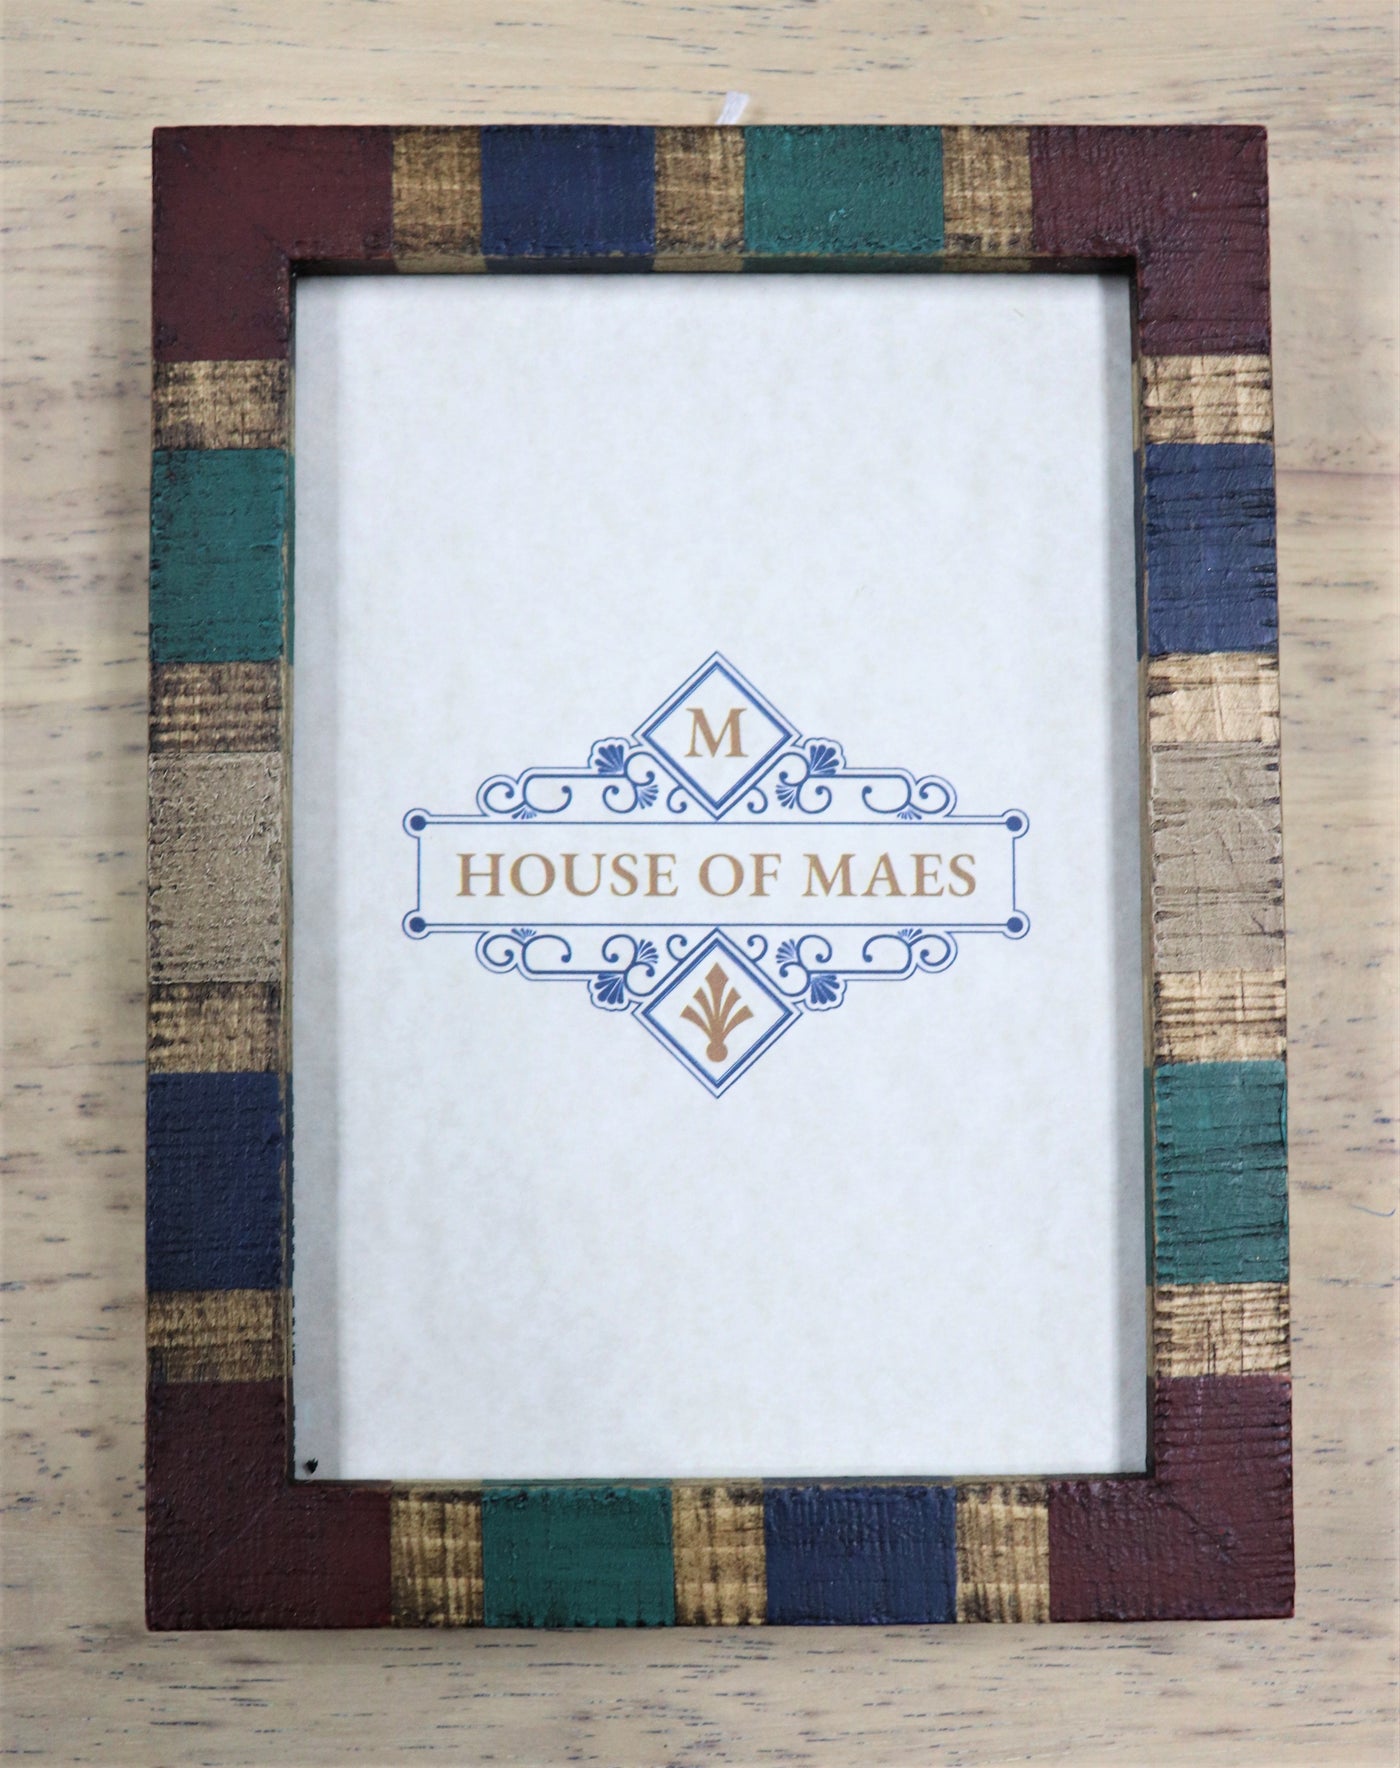 5" x 7" Red/Blue/Green/White Museum Glass Photo Frame- House of Maes